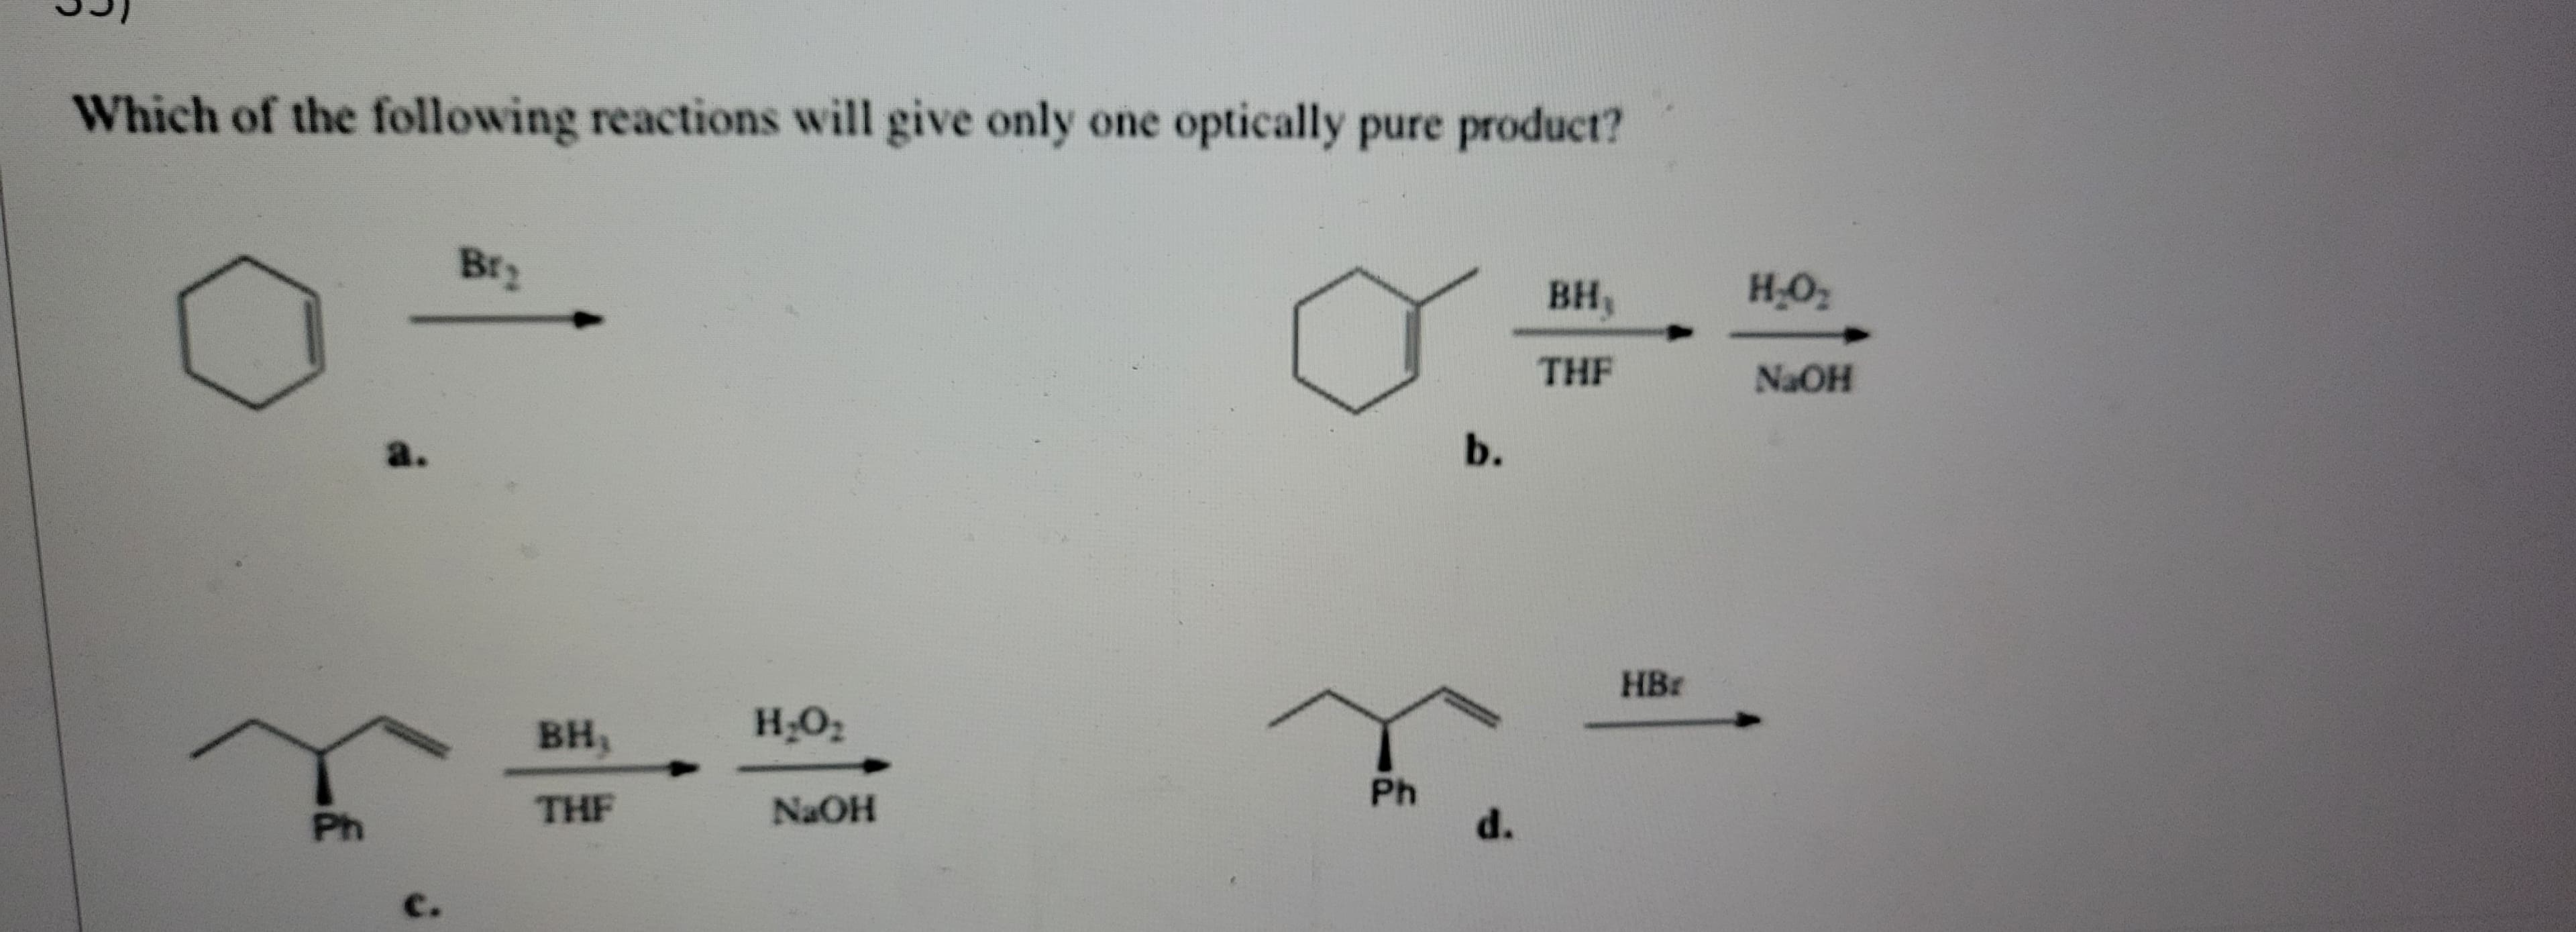 Which of the following reactions will give only one optically pure product?
Ph
Br₂
BH,
THE
H₂O₂
NaOH
Ph
b.
d.
BH,
THE
HB:
H₂O₂
NaOH